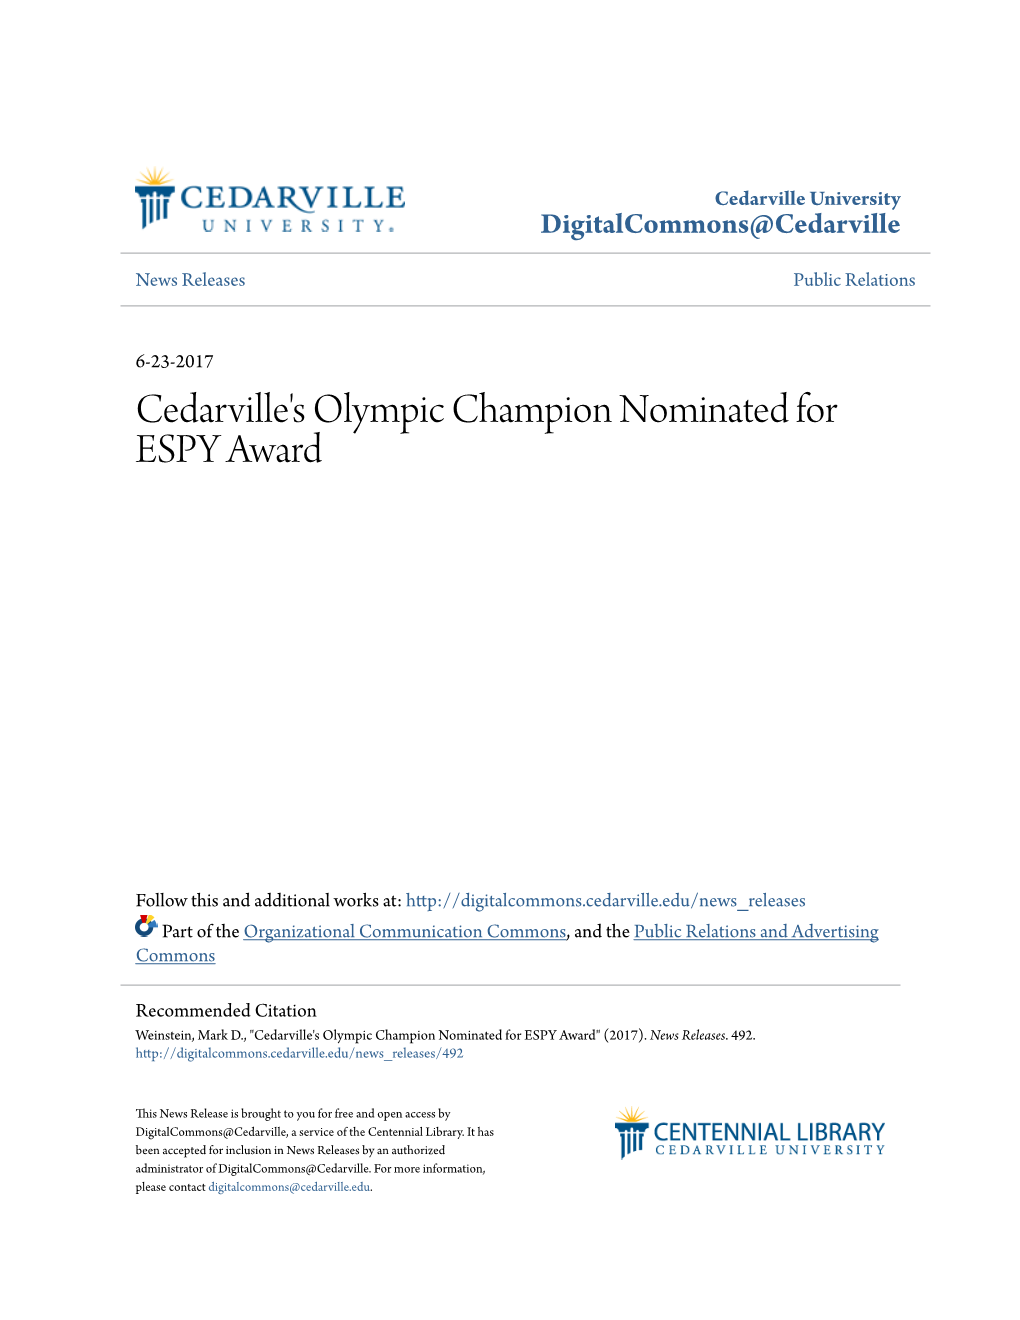 Cedarville's Olympic Champion Nominated for ESPY Award